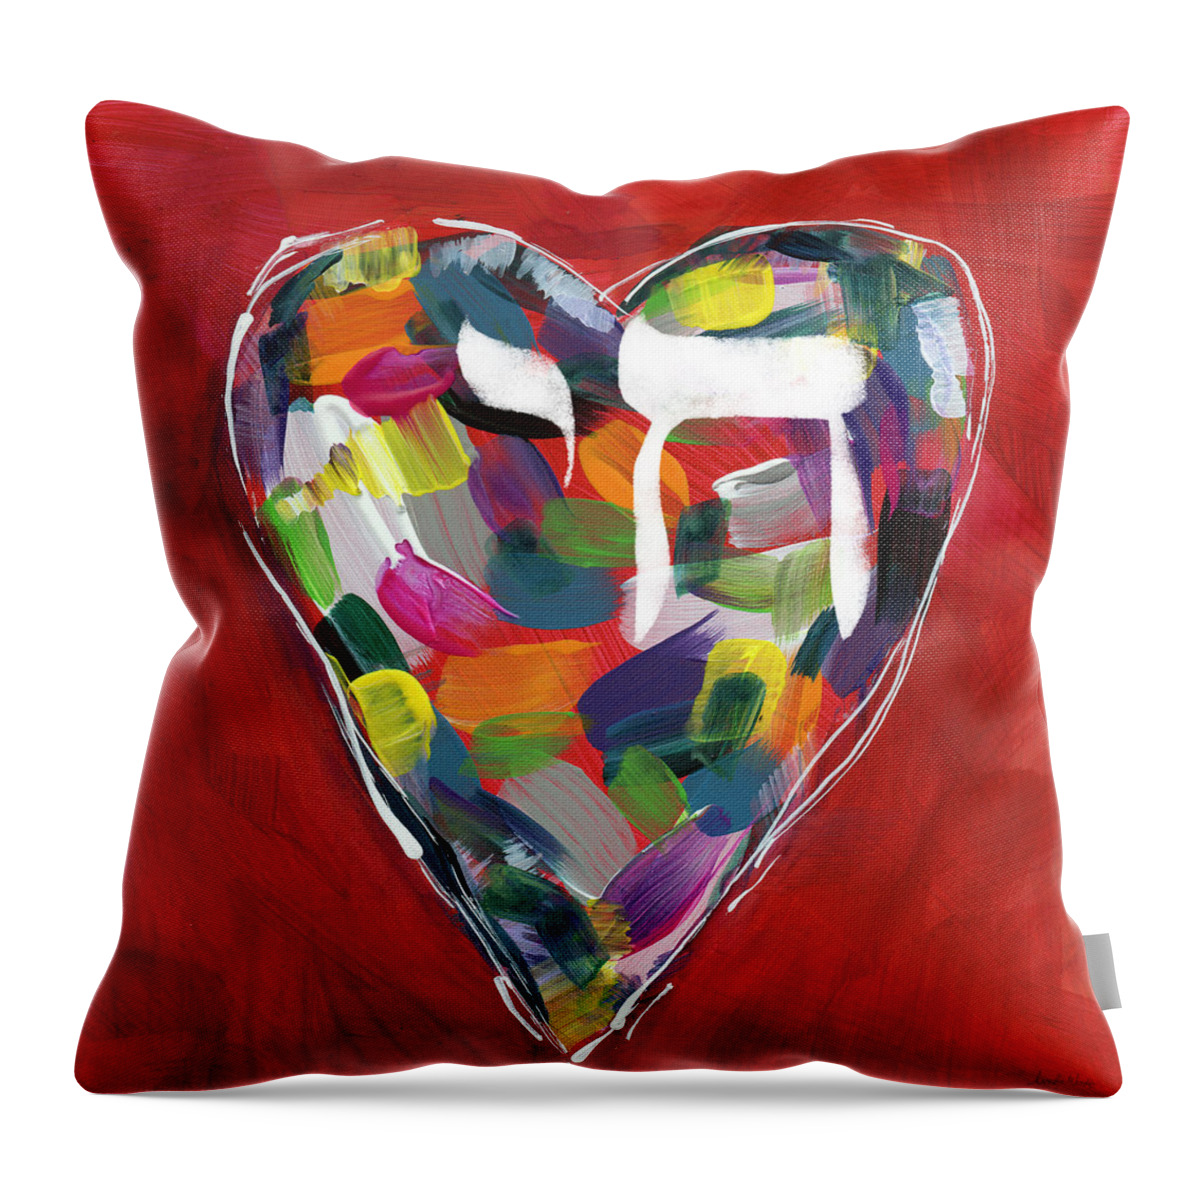 Chai Throw Pillow featuring the painting Life Is Colorful - Art by Linda Woods by Linda Woods